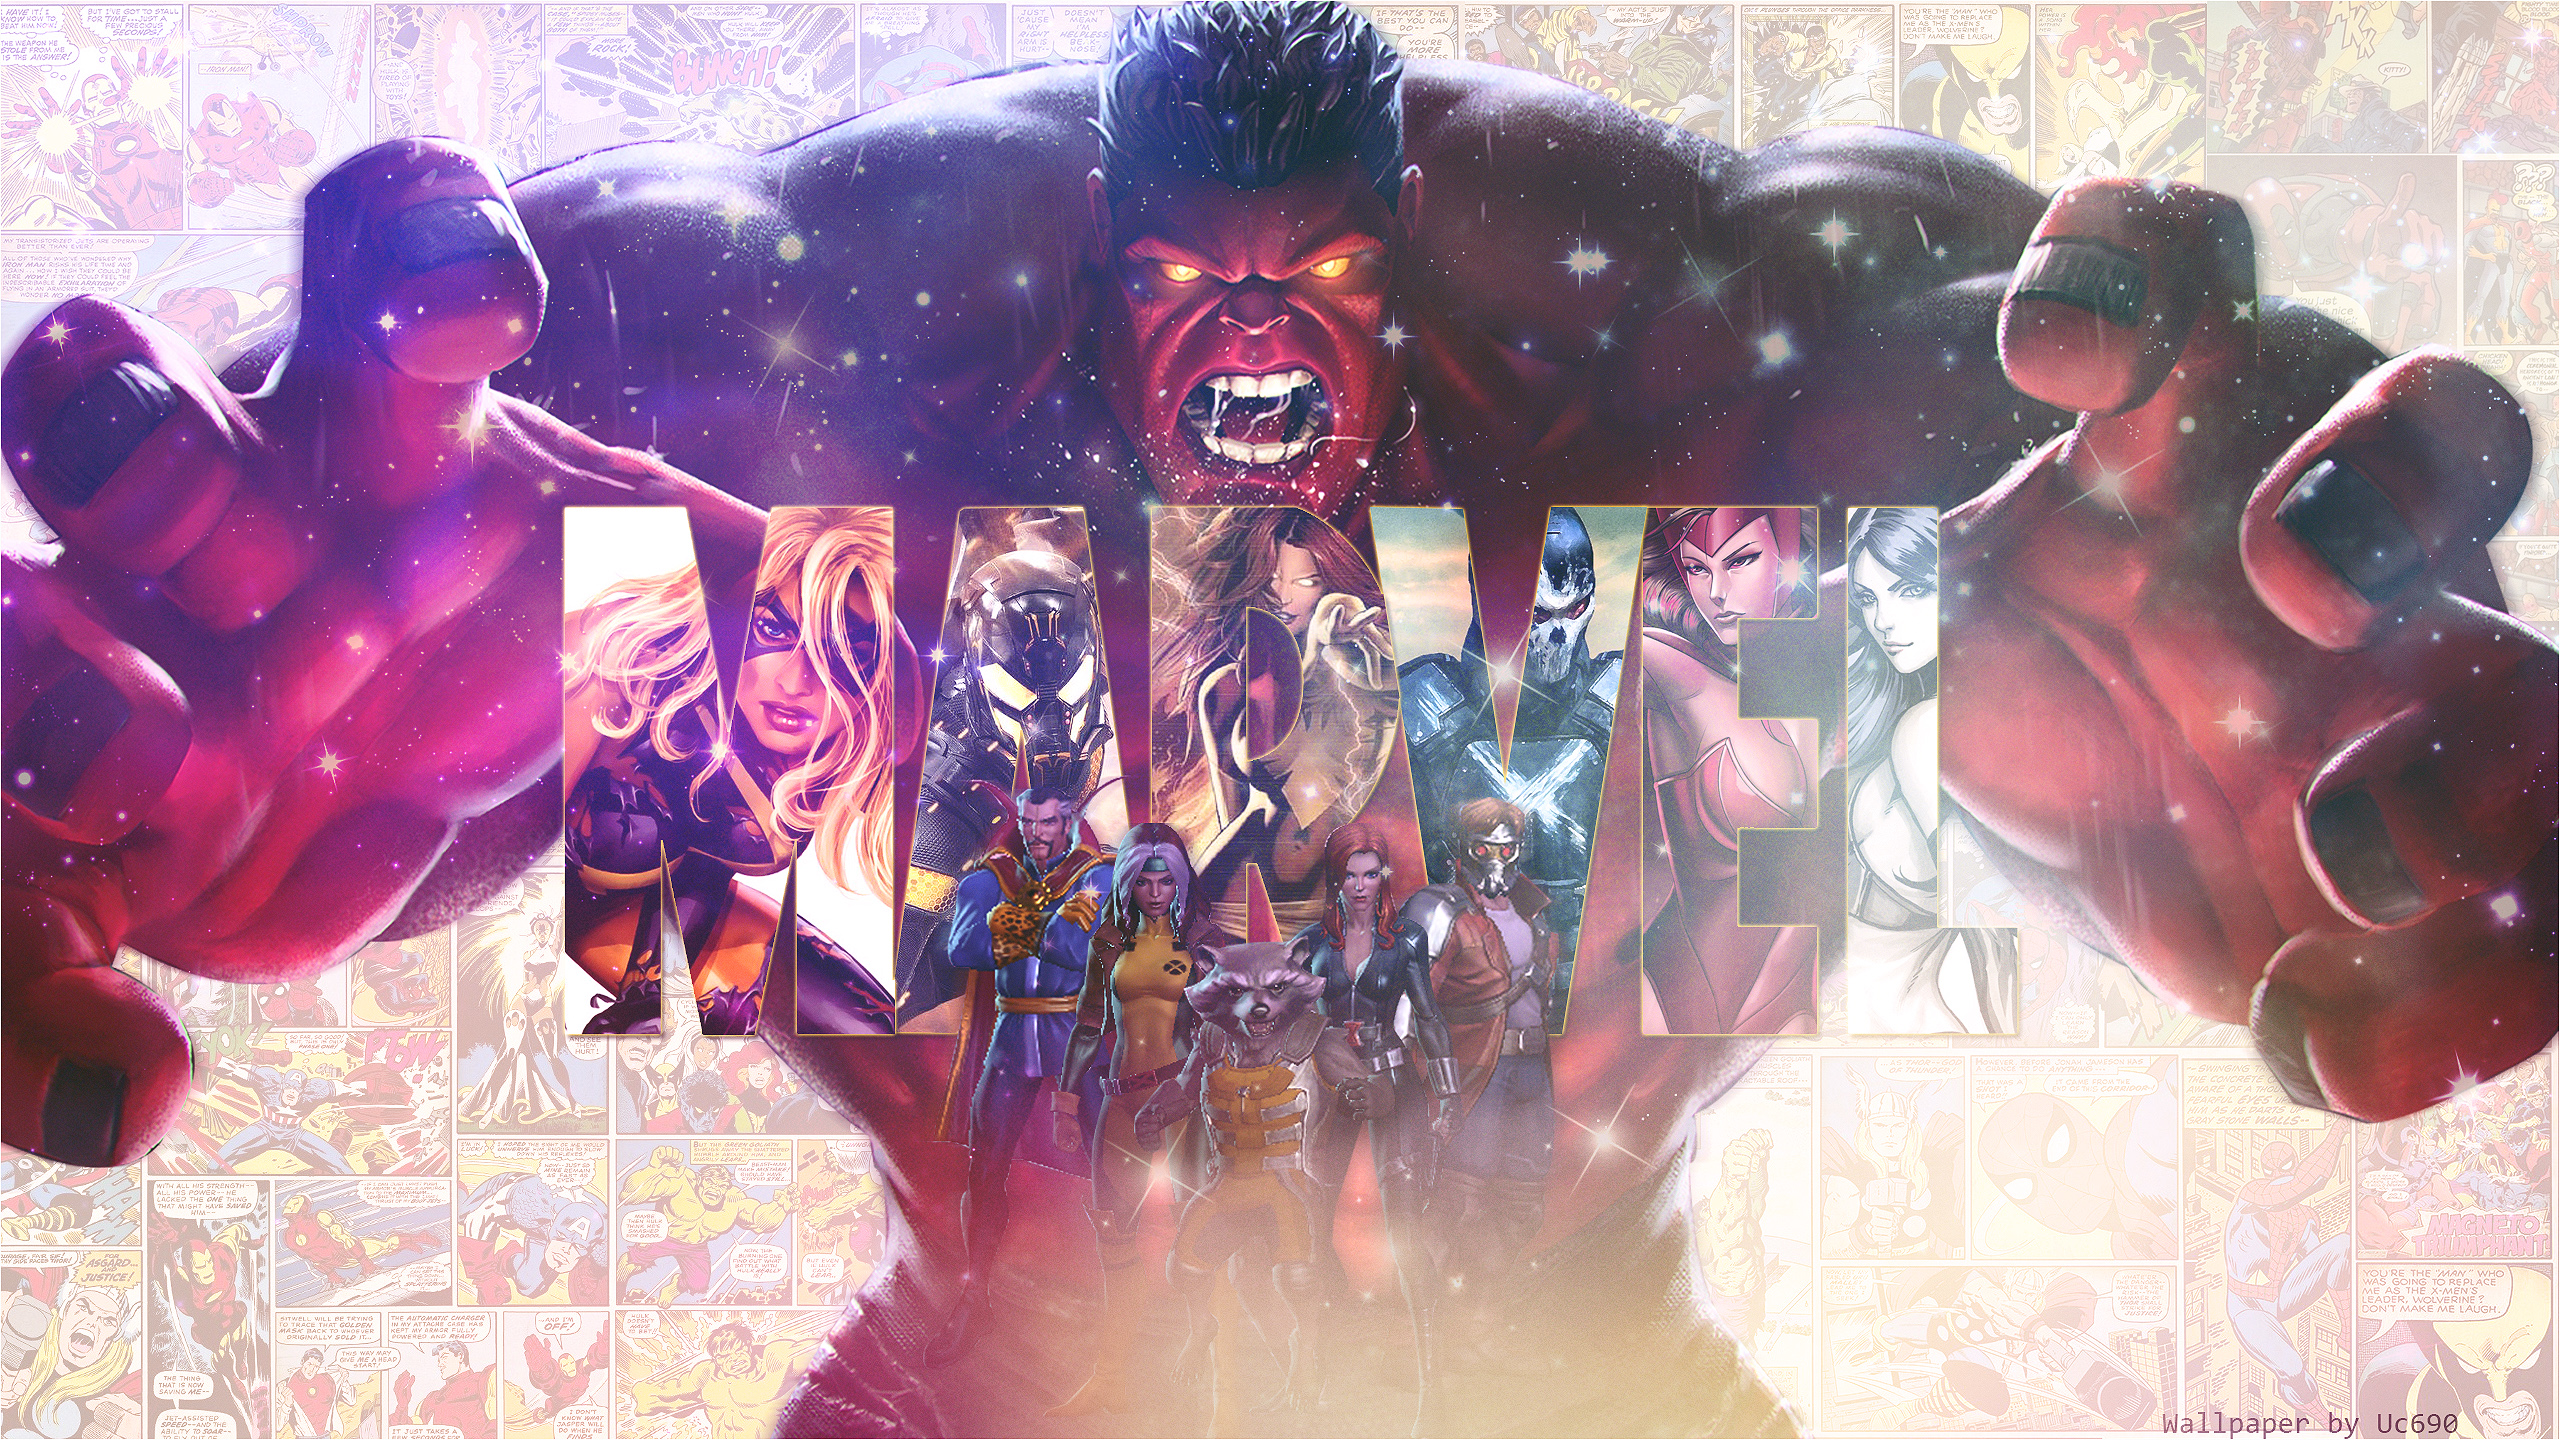 Marvel Heroes Images Wallpapers